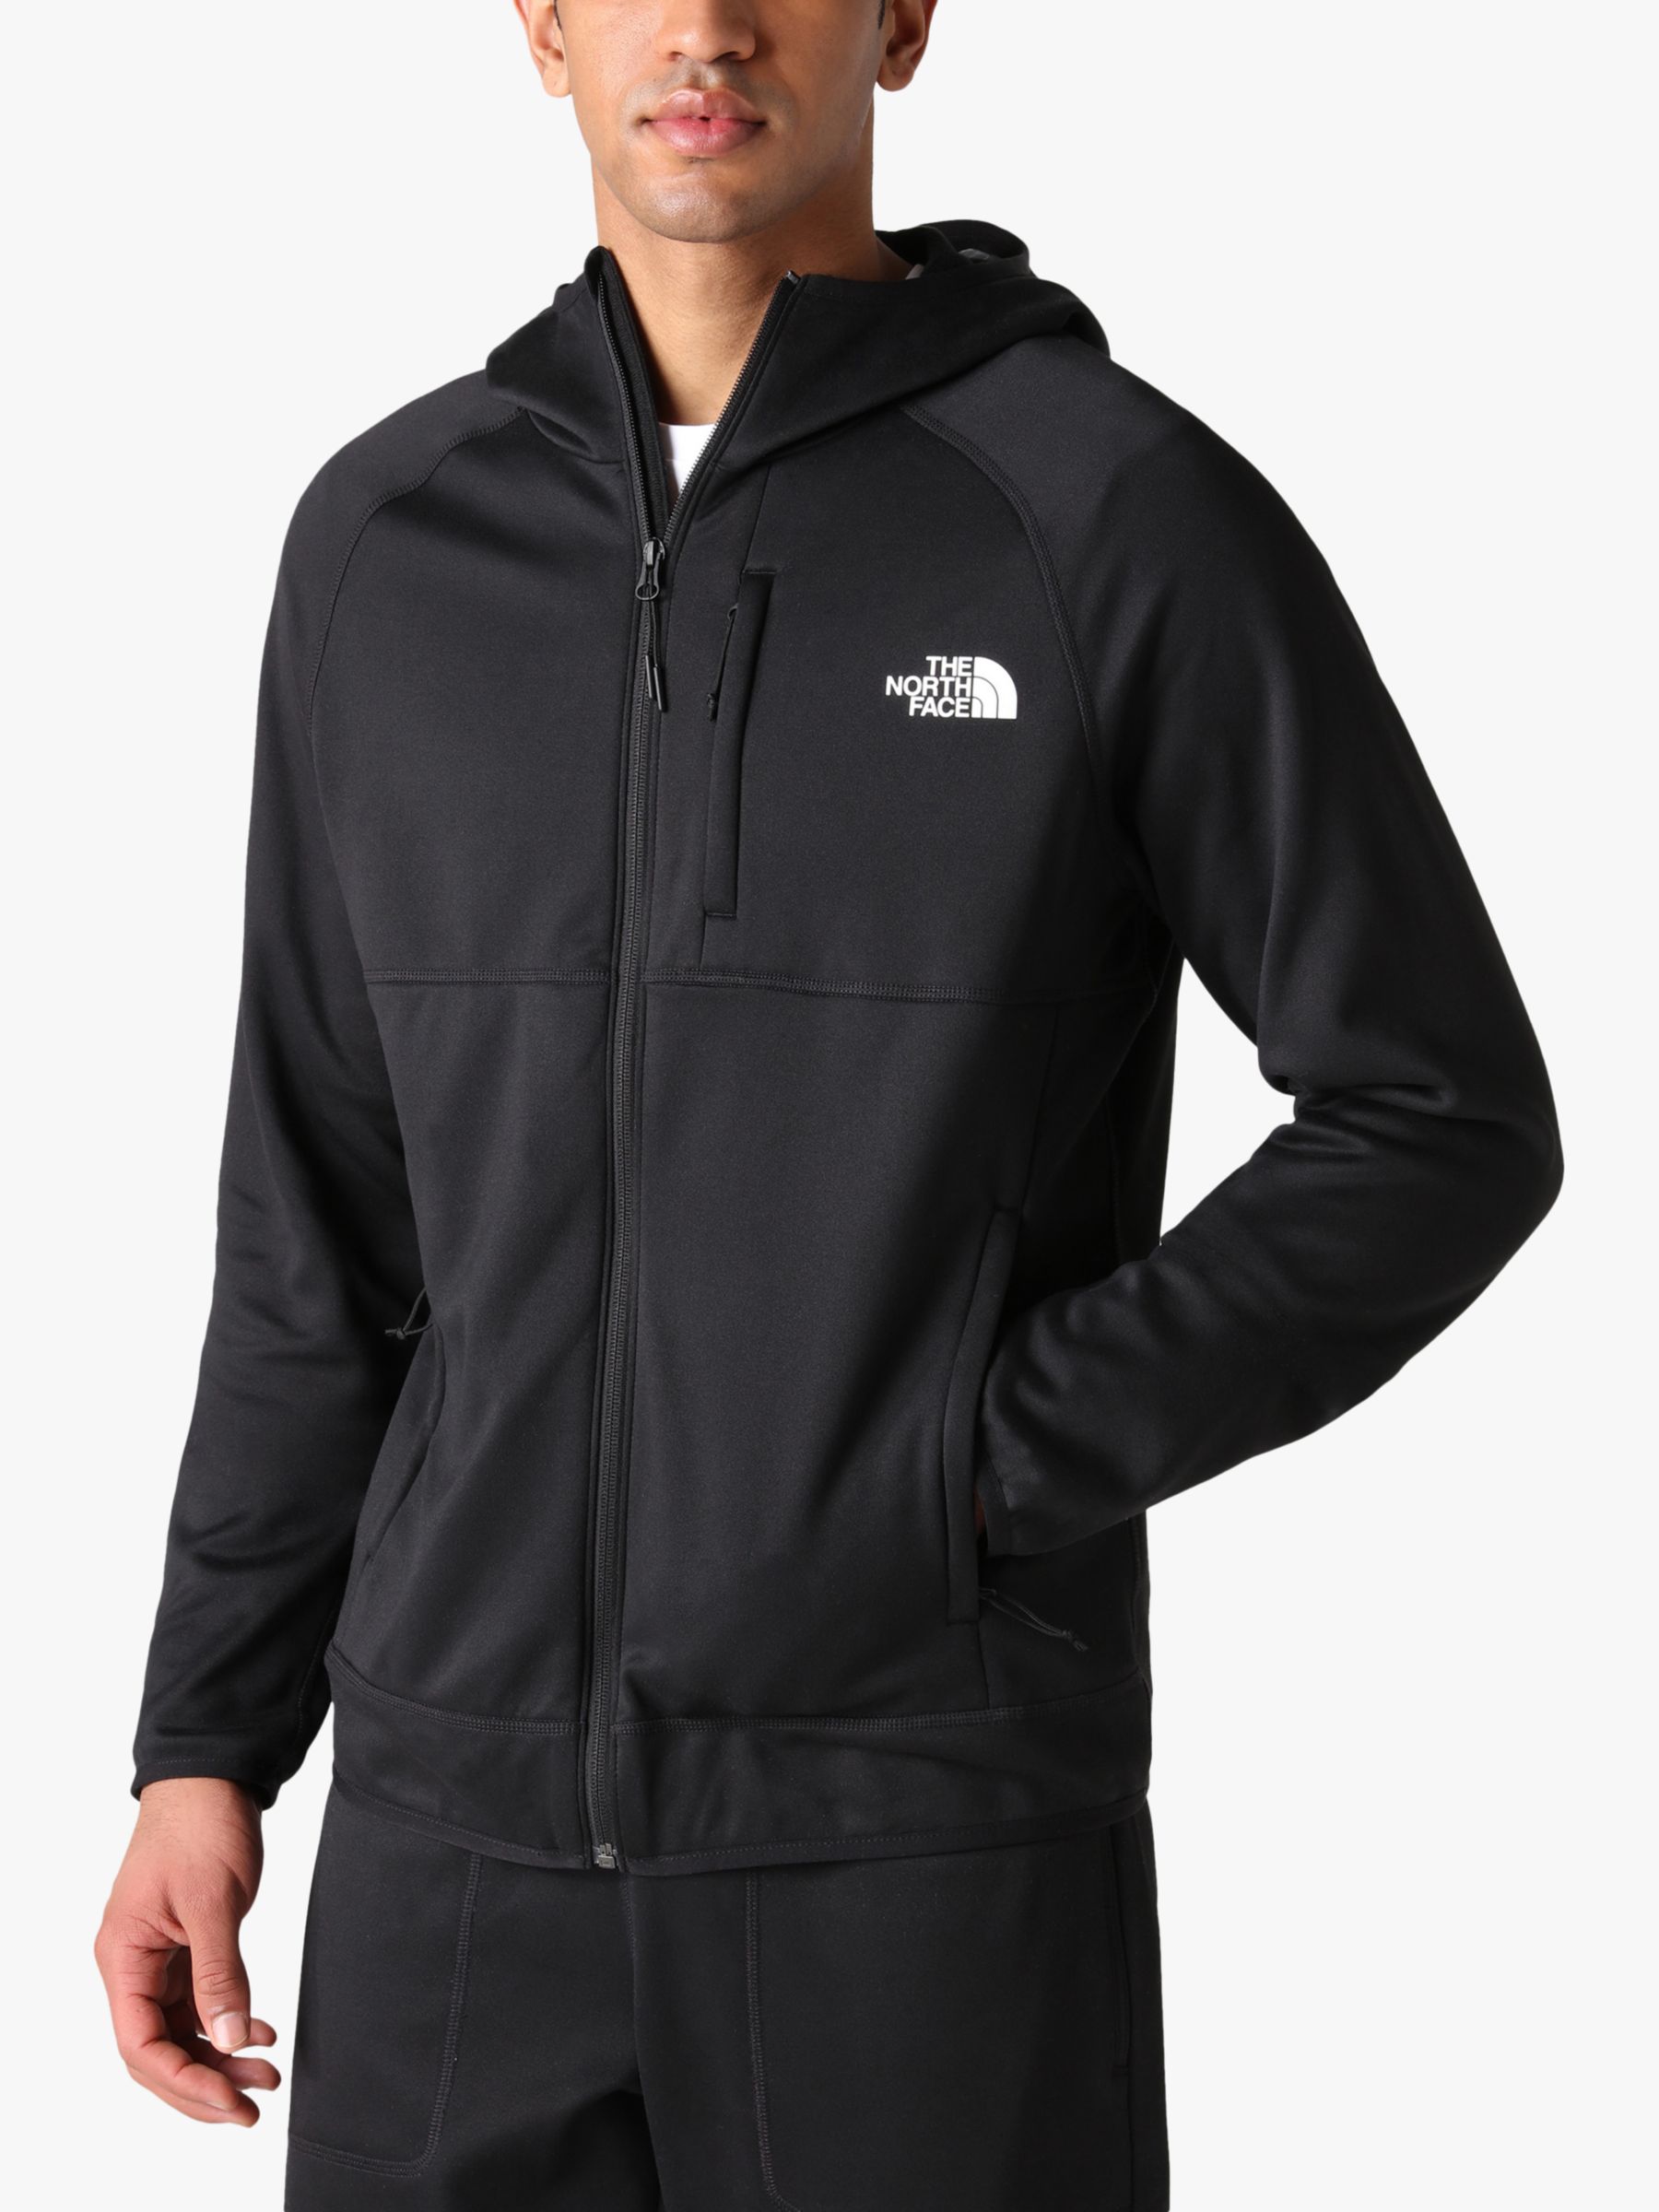 Men's Canyonlands Full-Zip Jacket The North Face, 53% OFF